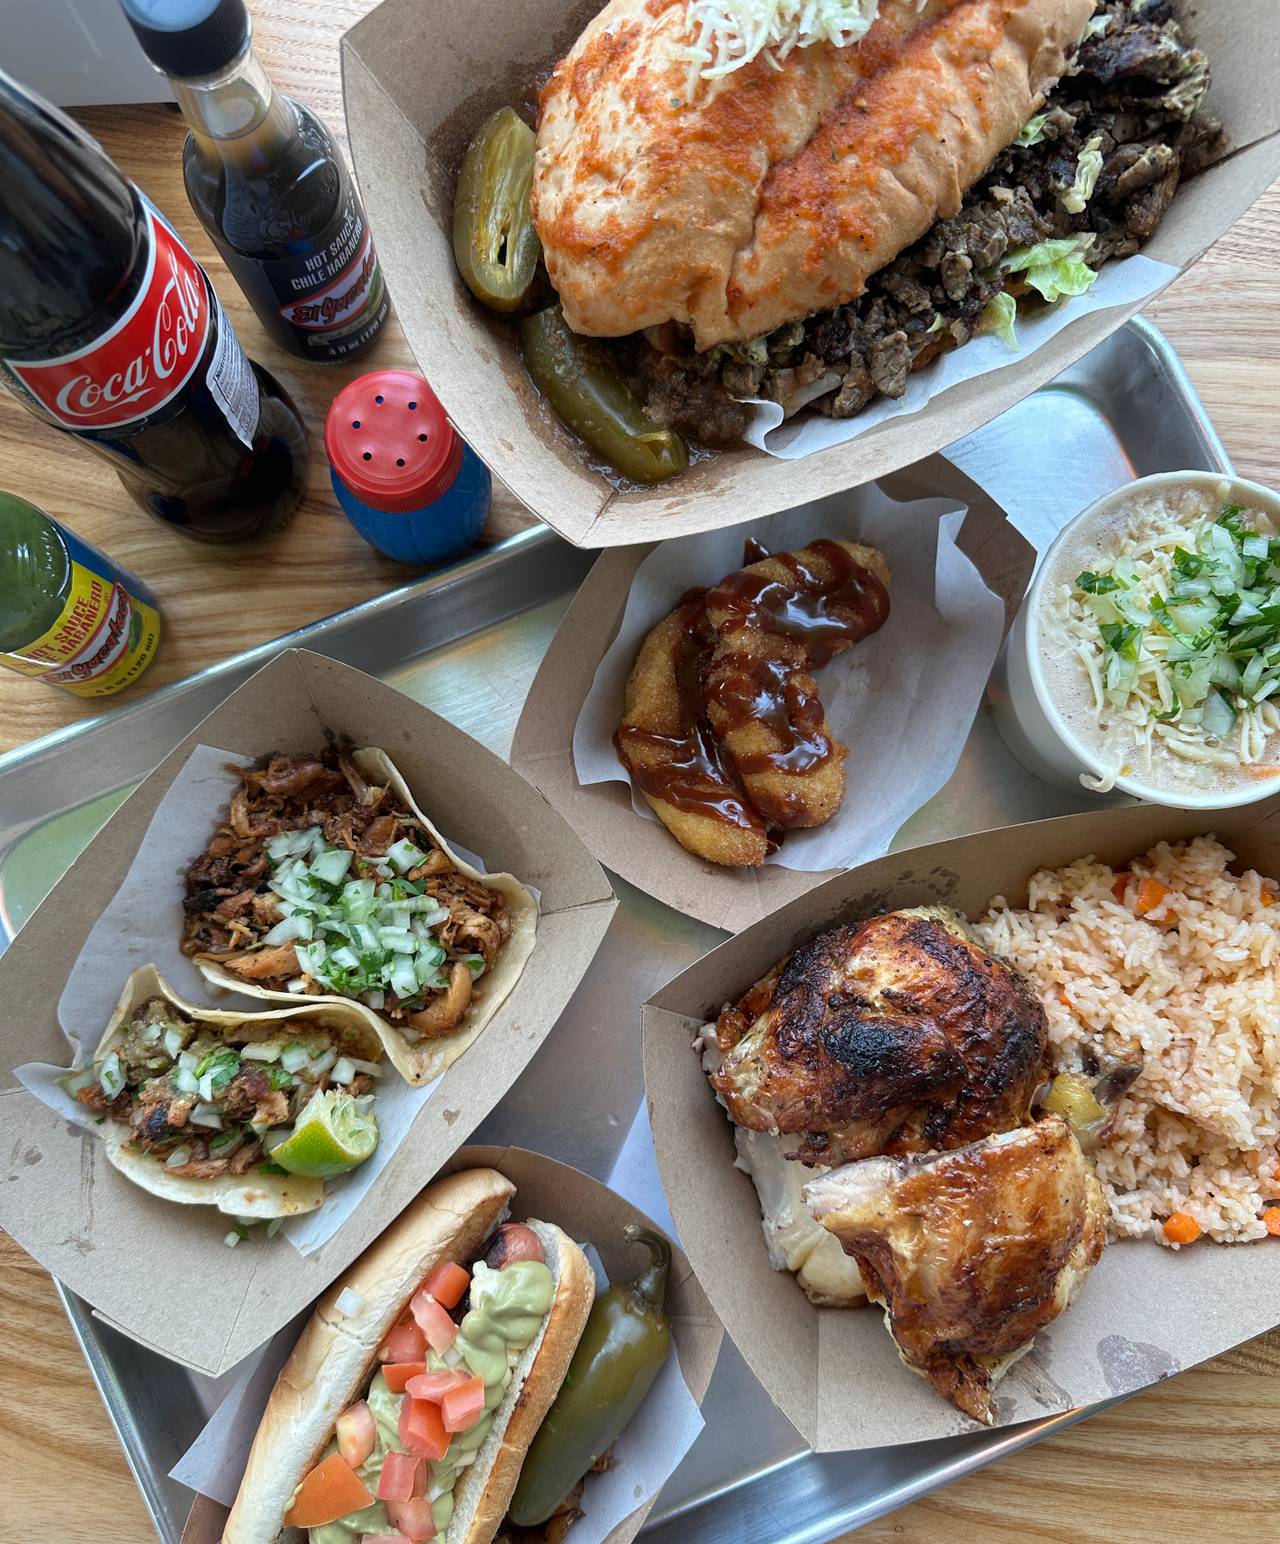 Clockwise from top: a torta, churros, rotisserie chicken, hot dog and tacos from Nana.